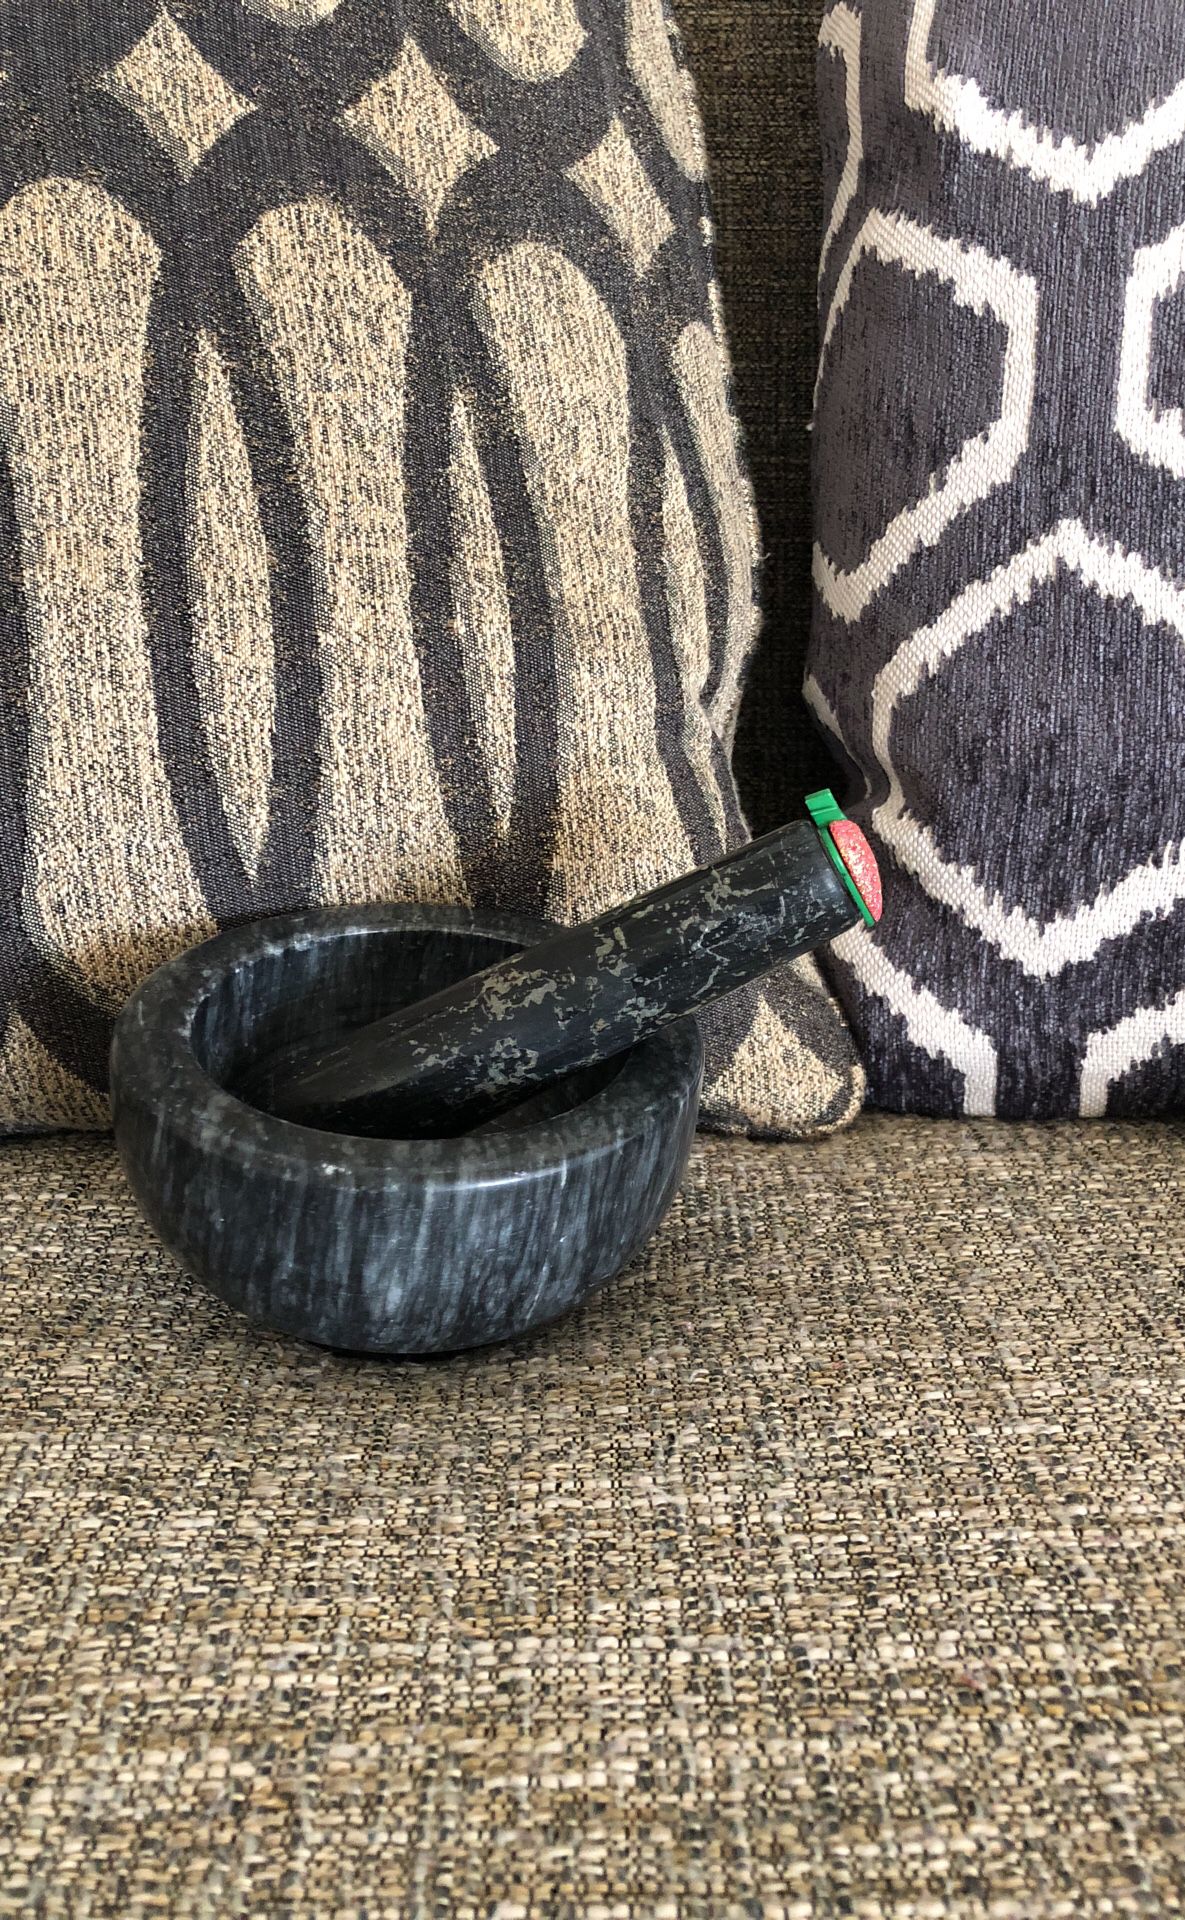 One Mortar and Pestle . Please see all the pictures